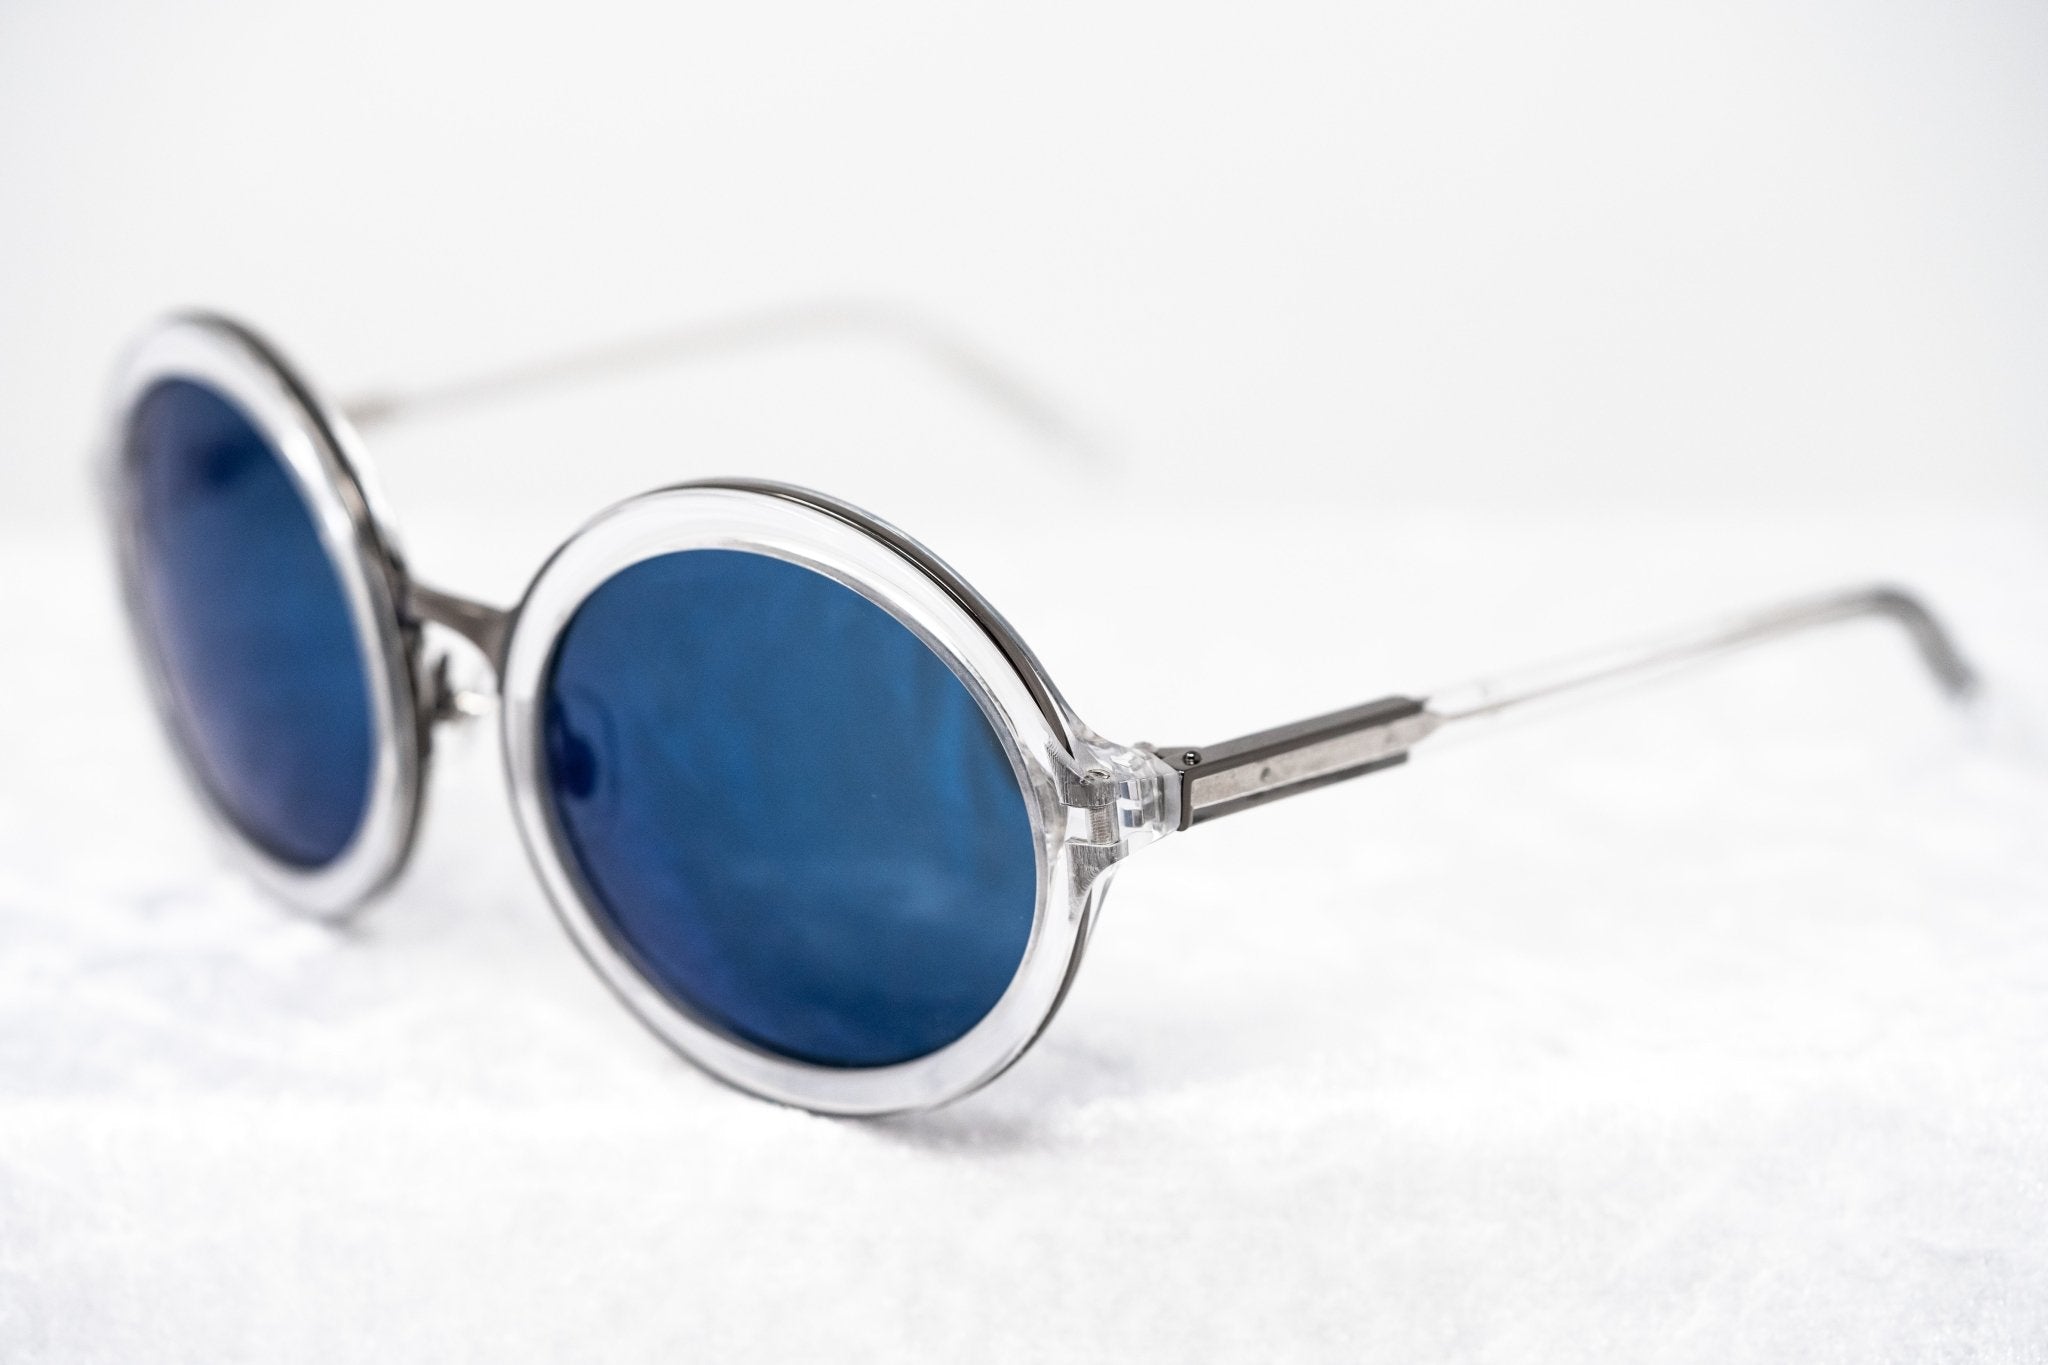 Phillip Lim Sunglasses Round Female Clear and Gun Metal with CAT3 Blue Mirror Lenses - PL11C25SUN - Watches & Crystals